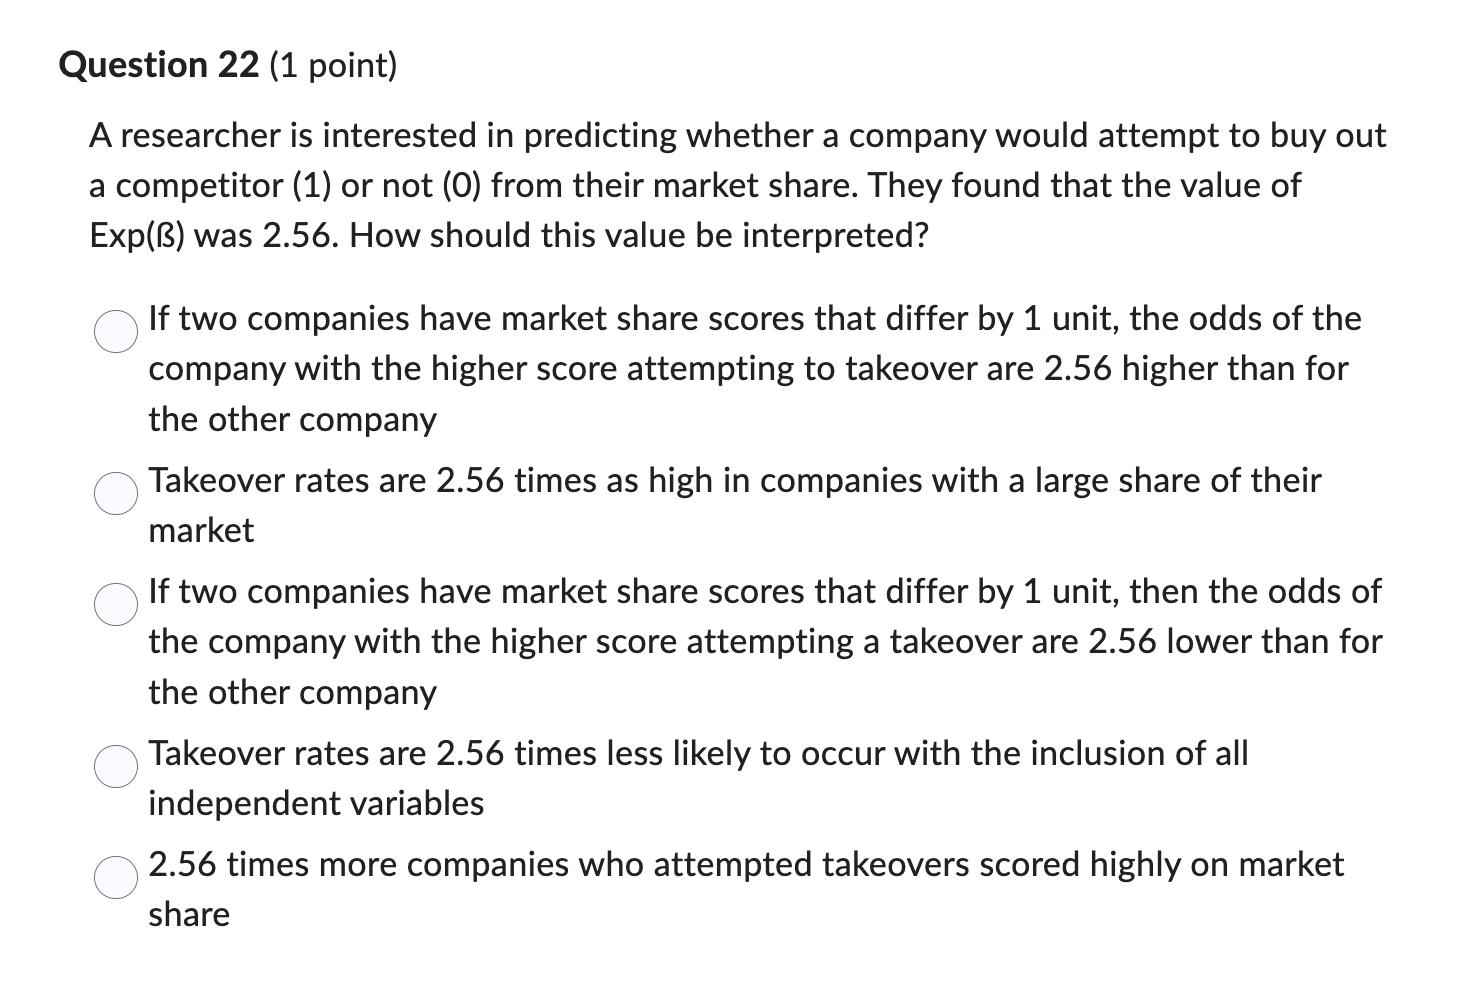 Question 22 (1 point) A researcher is interested in predicting whether a company would attempt to buy out a